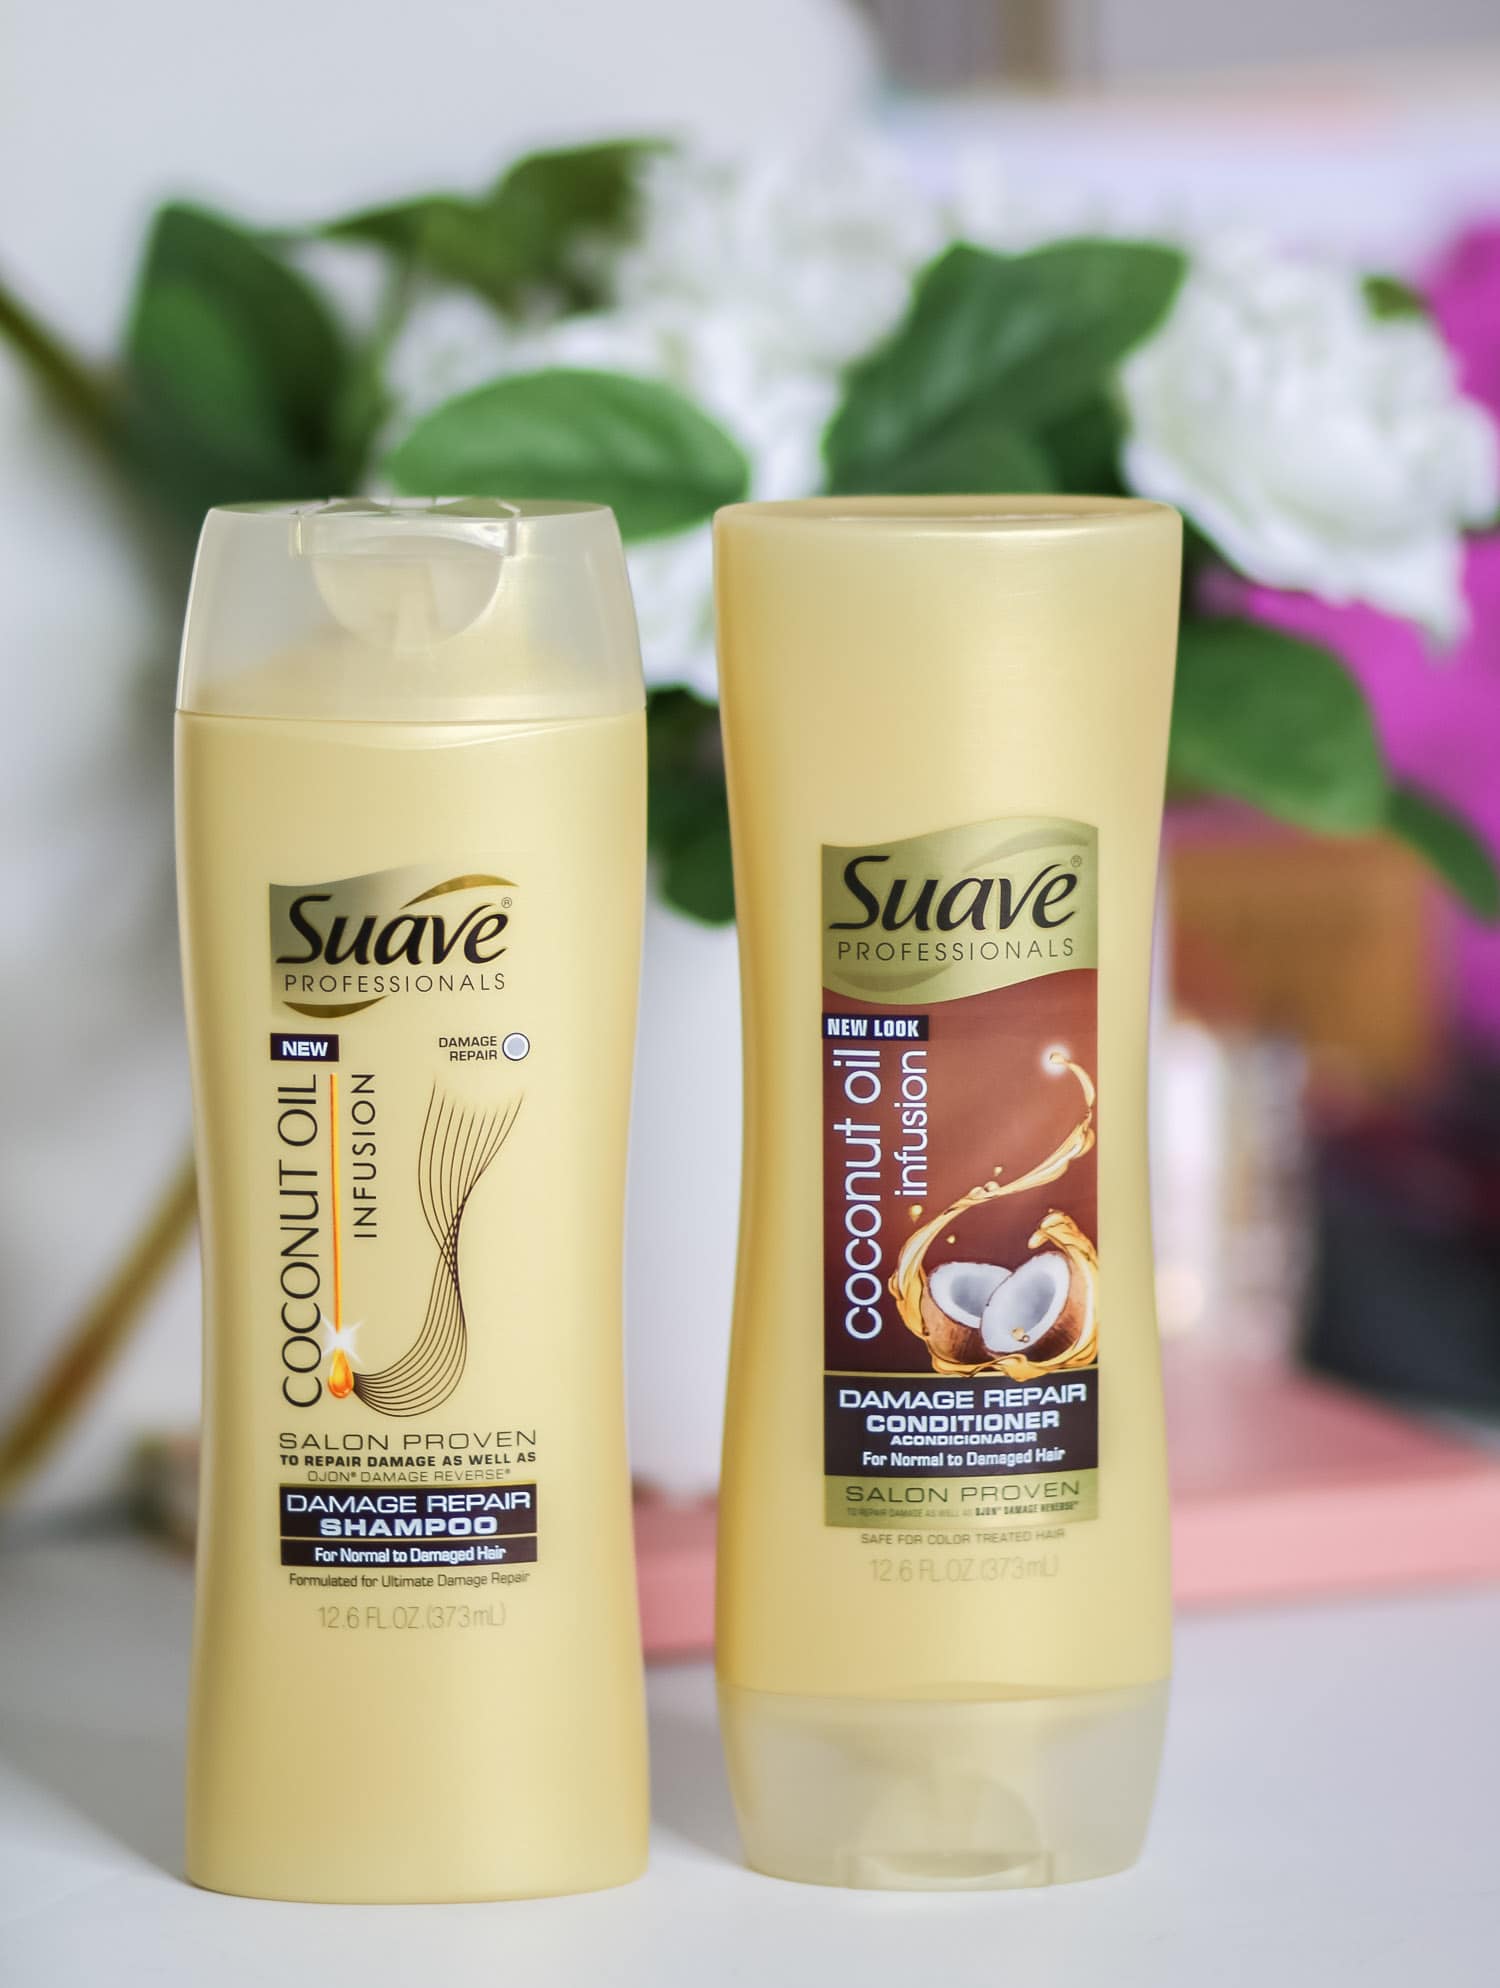 Looking for new hair products for summer? The Suave Professionals Coconut Oil Infusion line smells like coconuts, and the coconut oil in the formula leaves your hair soft and smooth. 